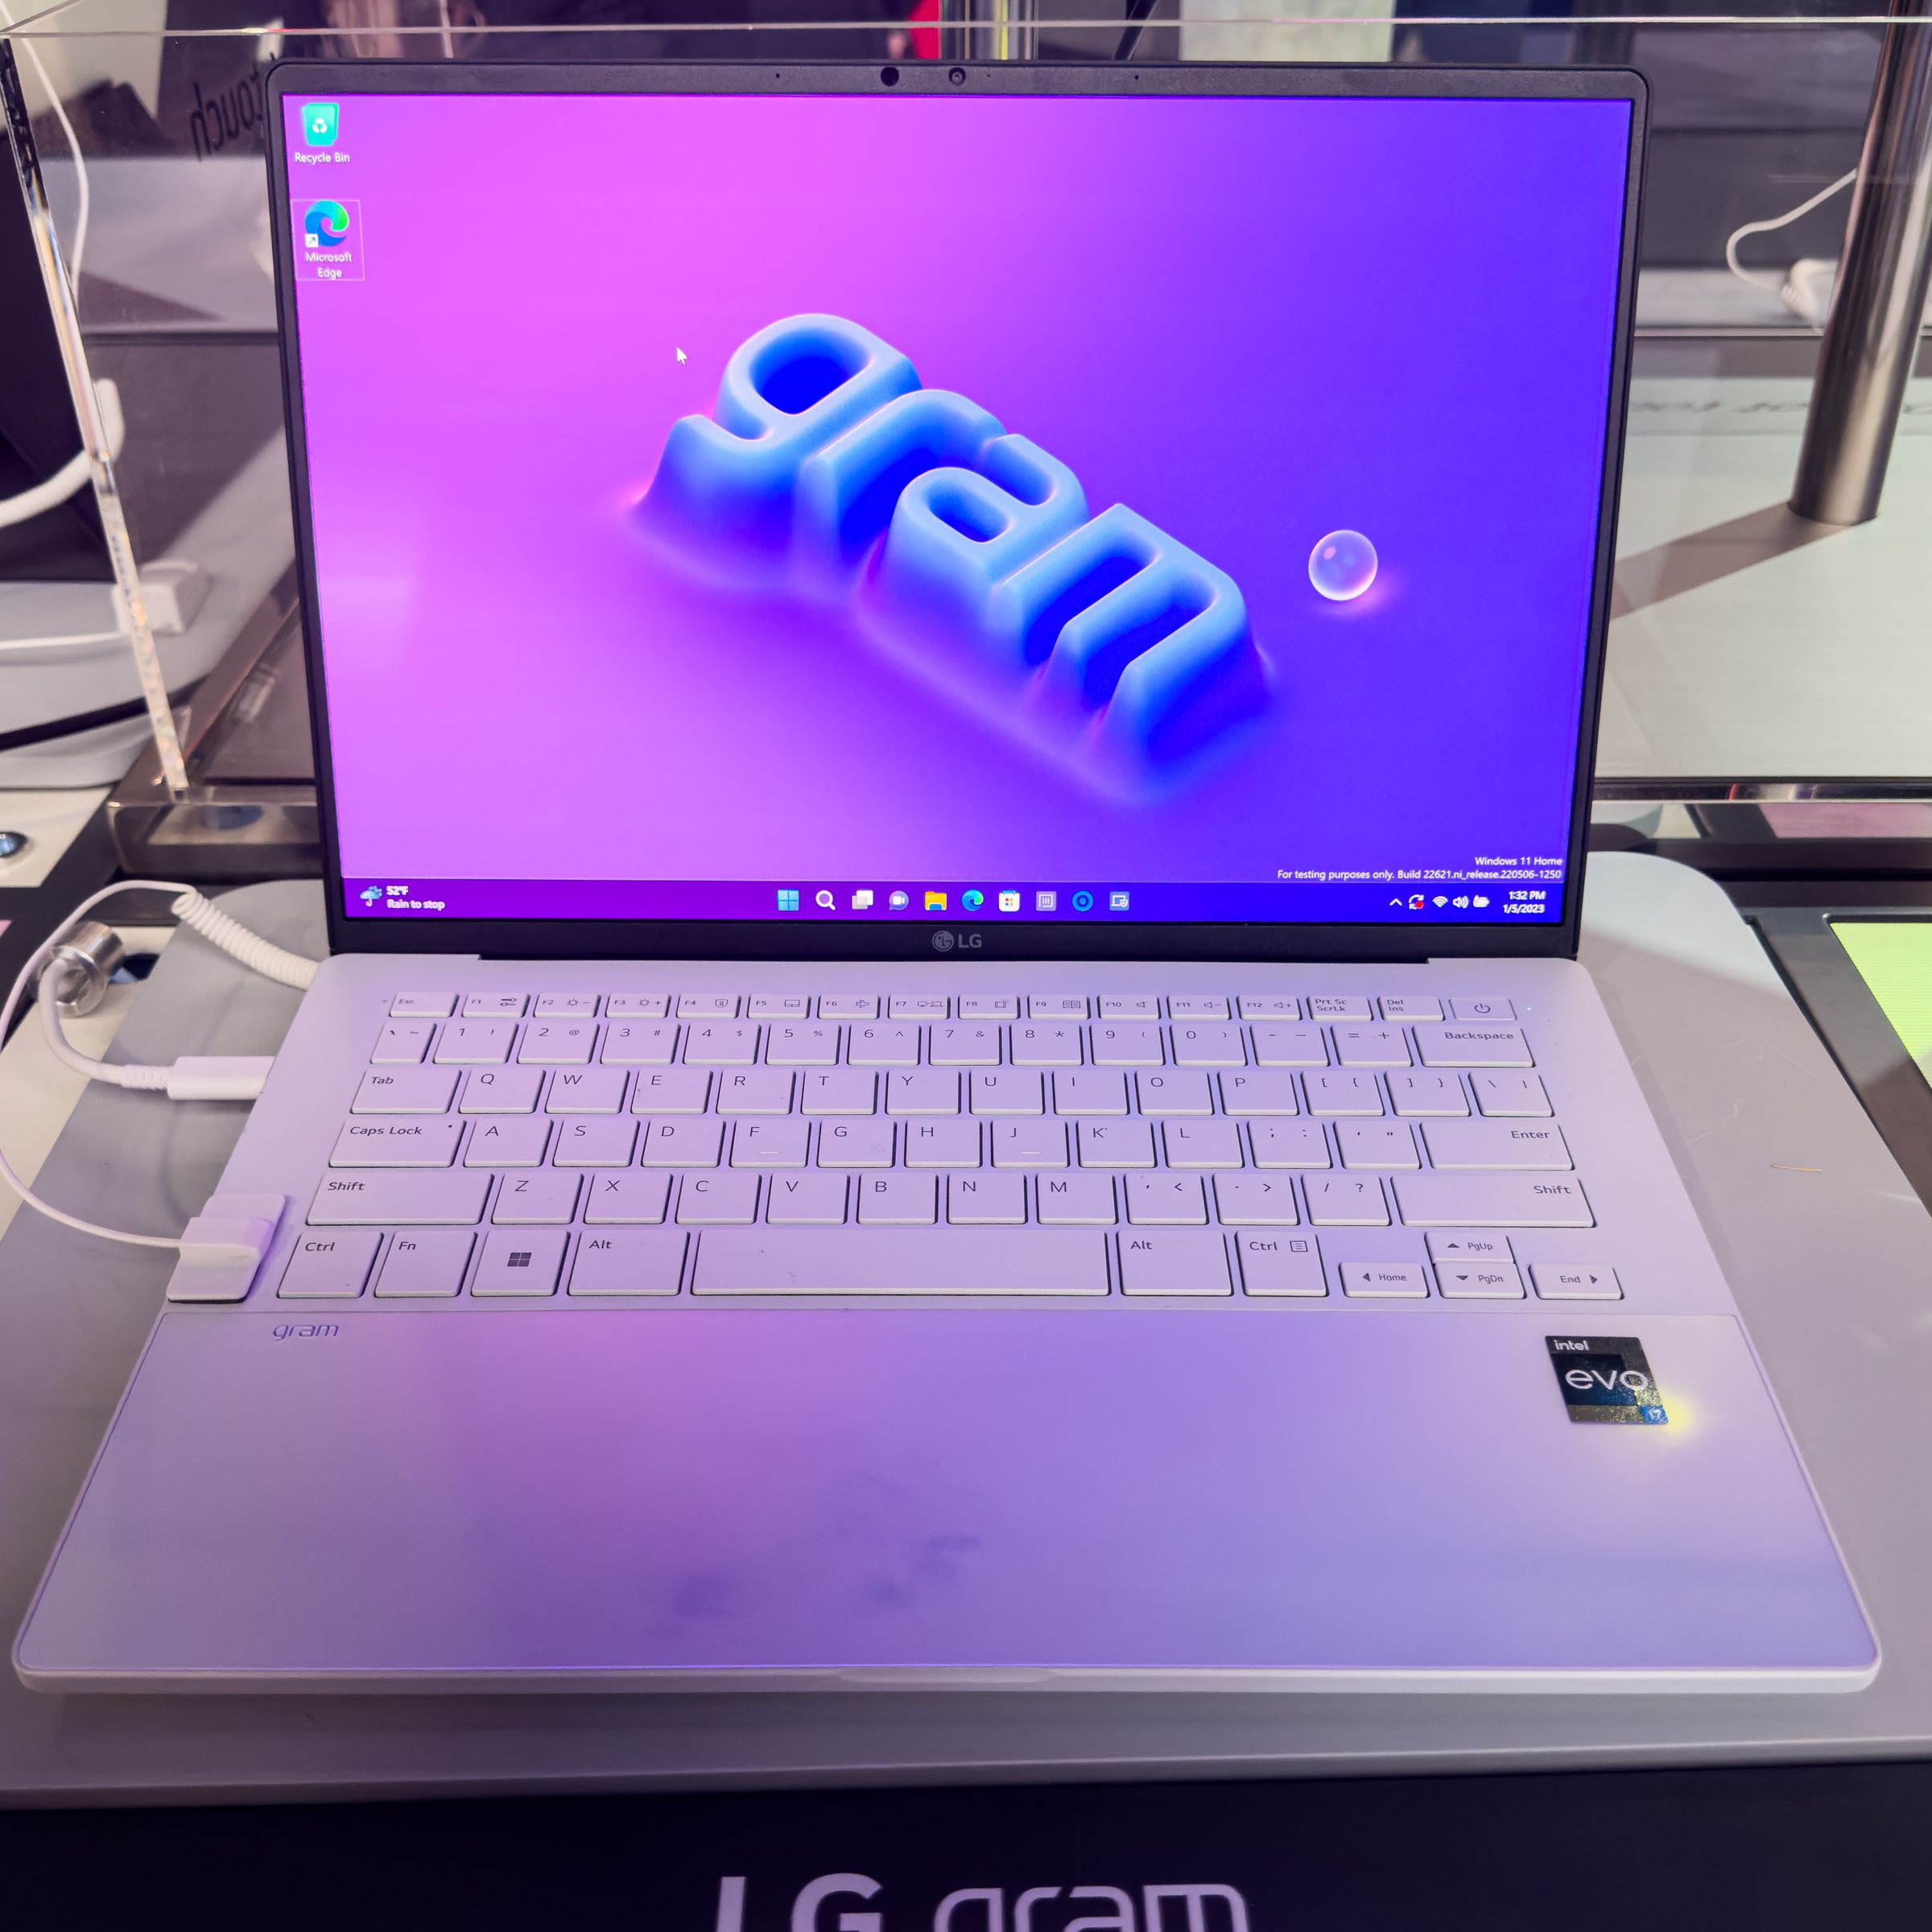 The LG Gram Style displaying the blue Gram logo on a purple background.